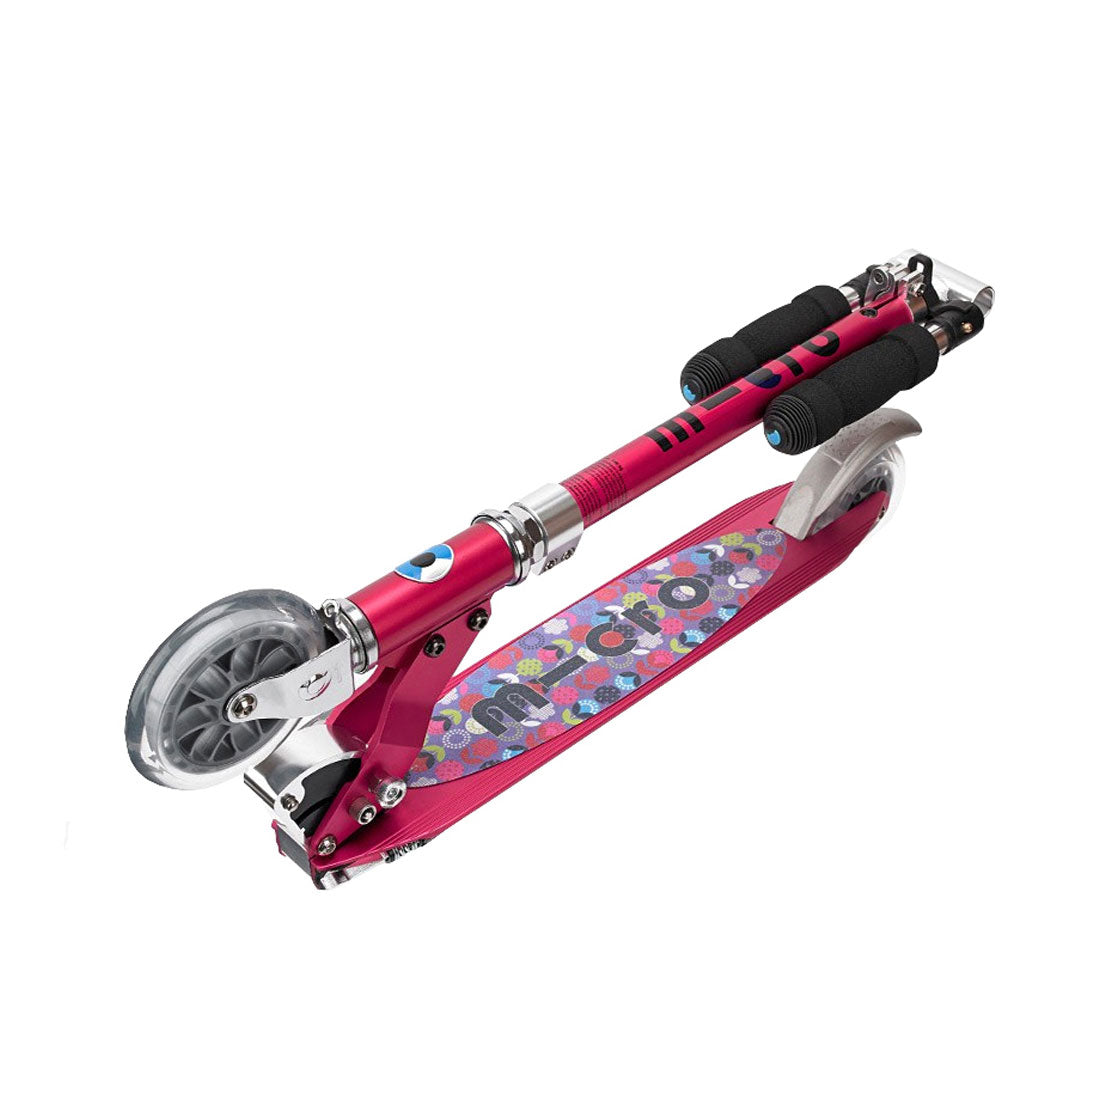 Micro Sprite Scooter - Raspberry Floral Dot Scooter Completes Rec